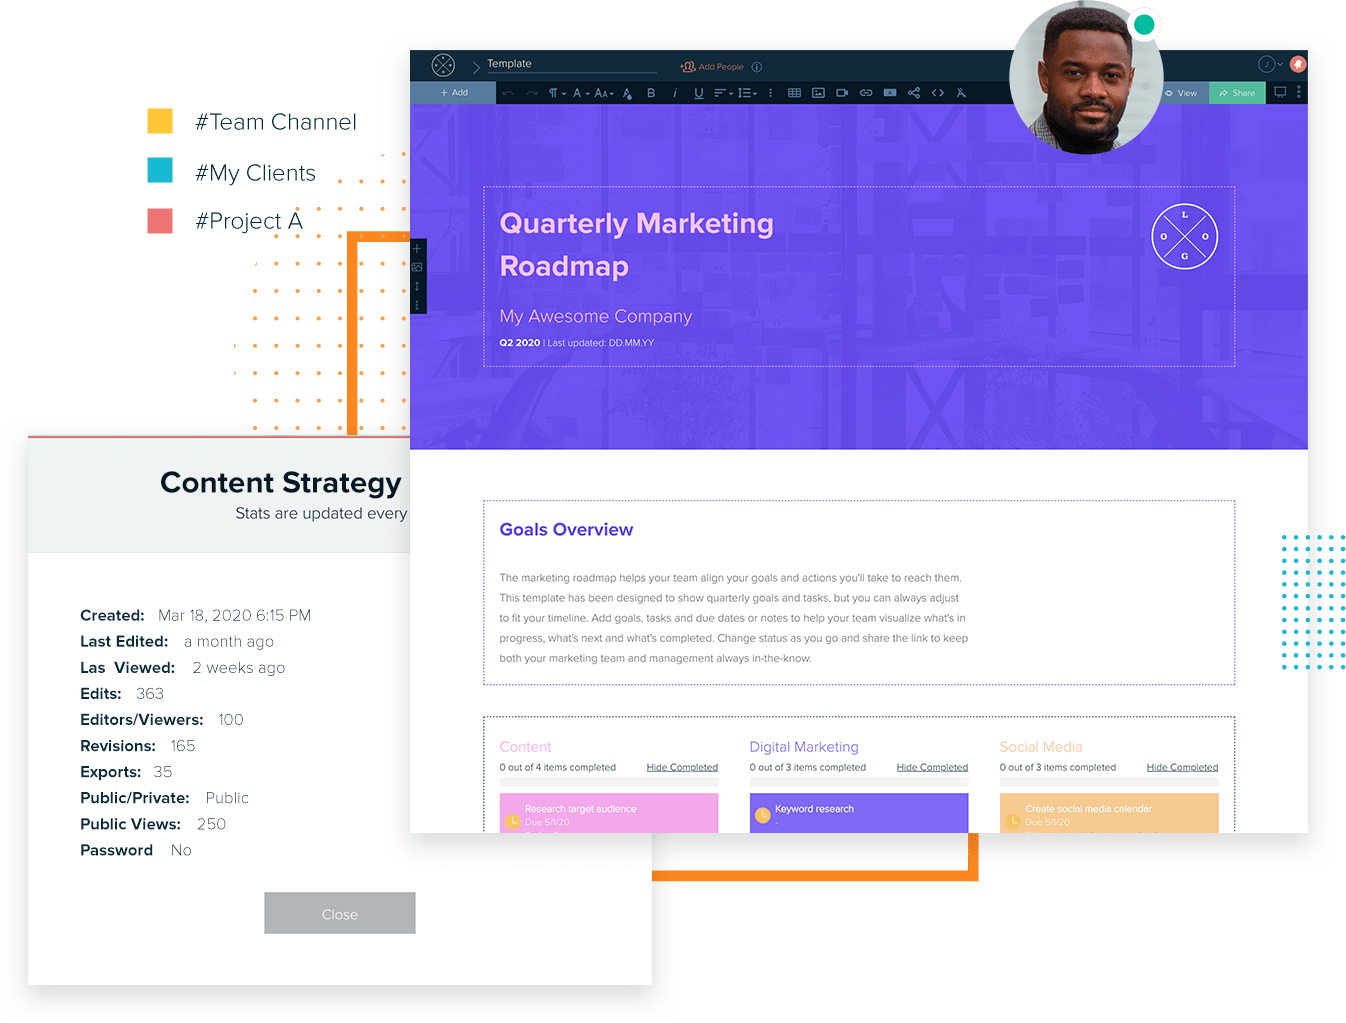 Xtensio Dashboard View With Quarterly Marketing Roadmap Template, Stats Module Among Other Features